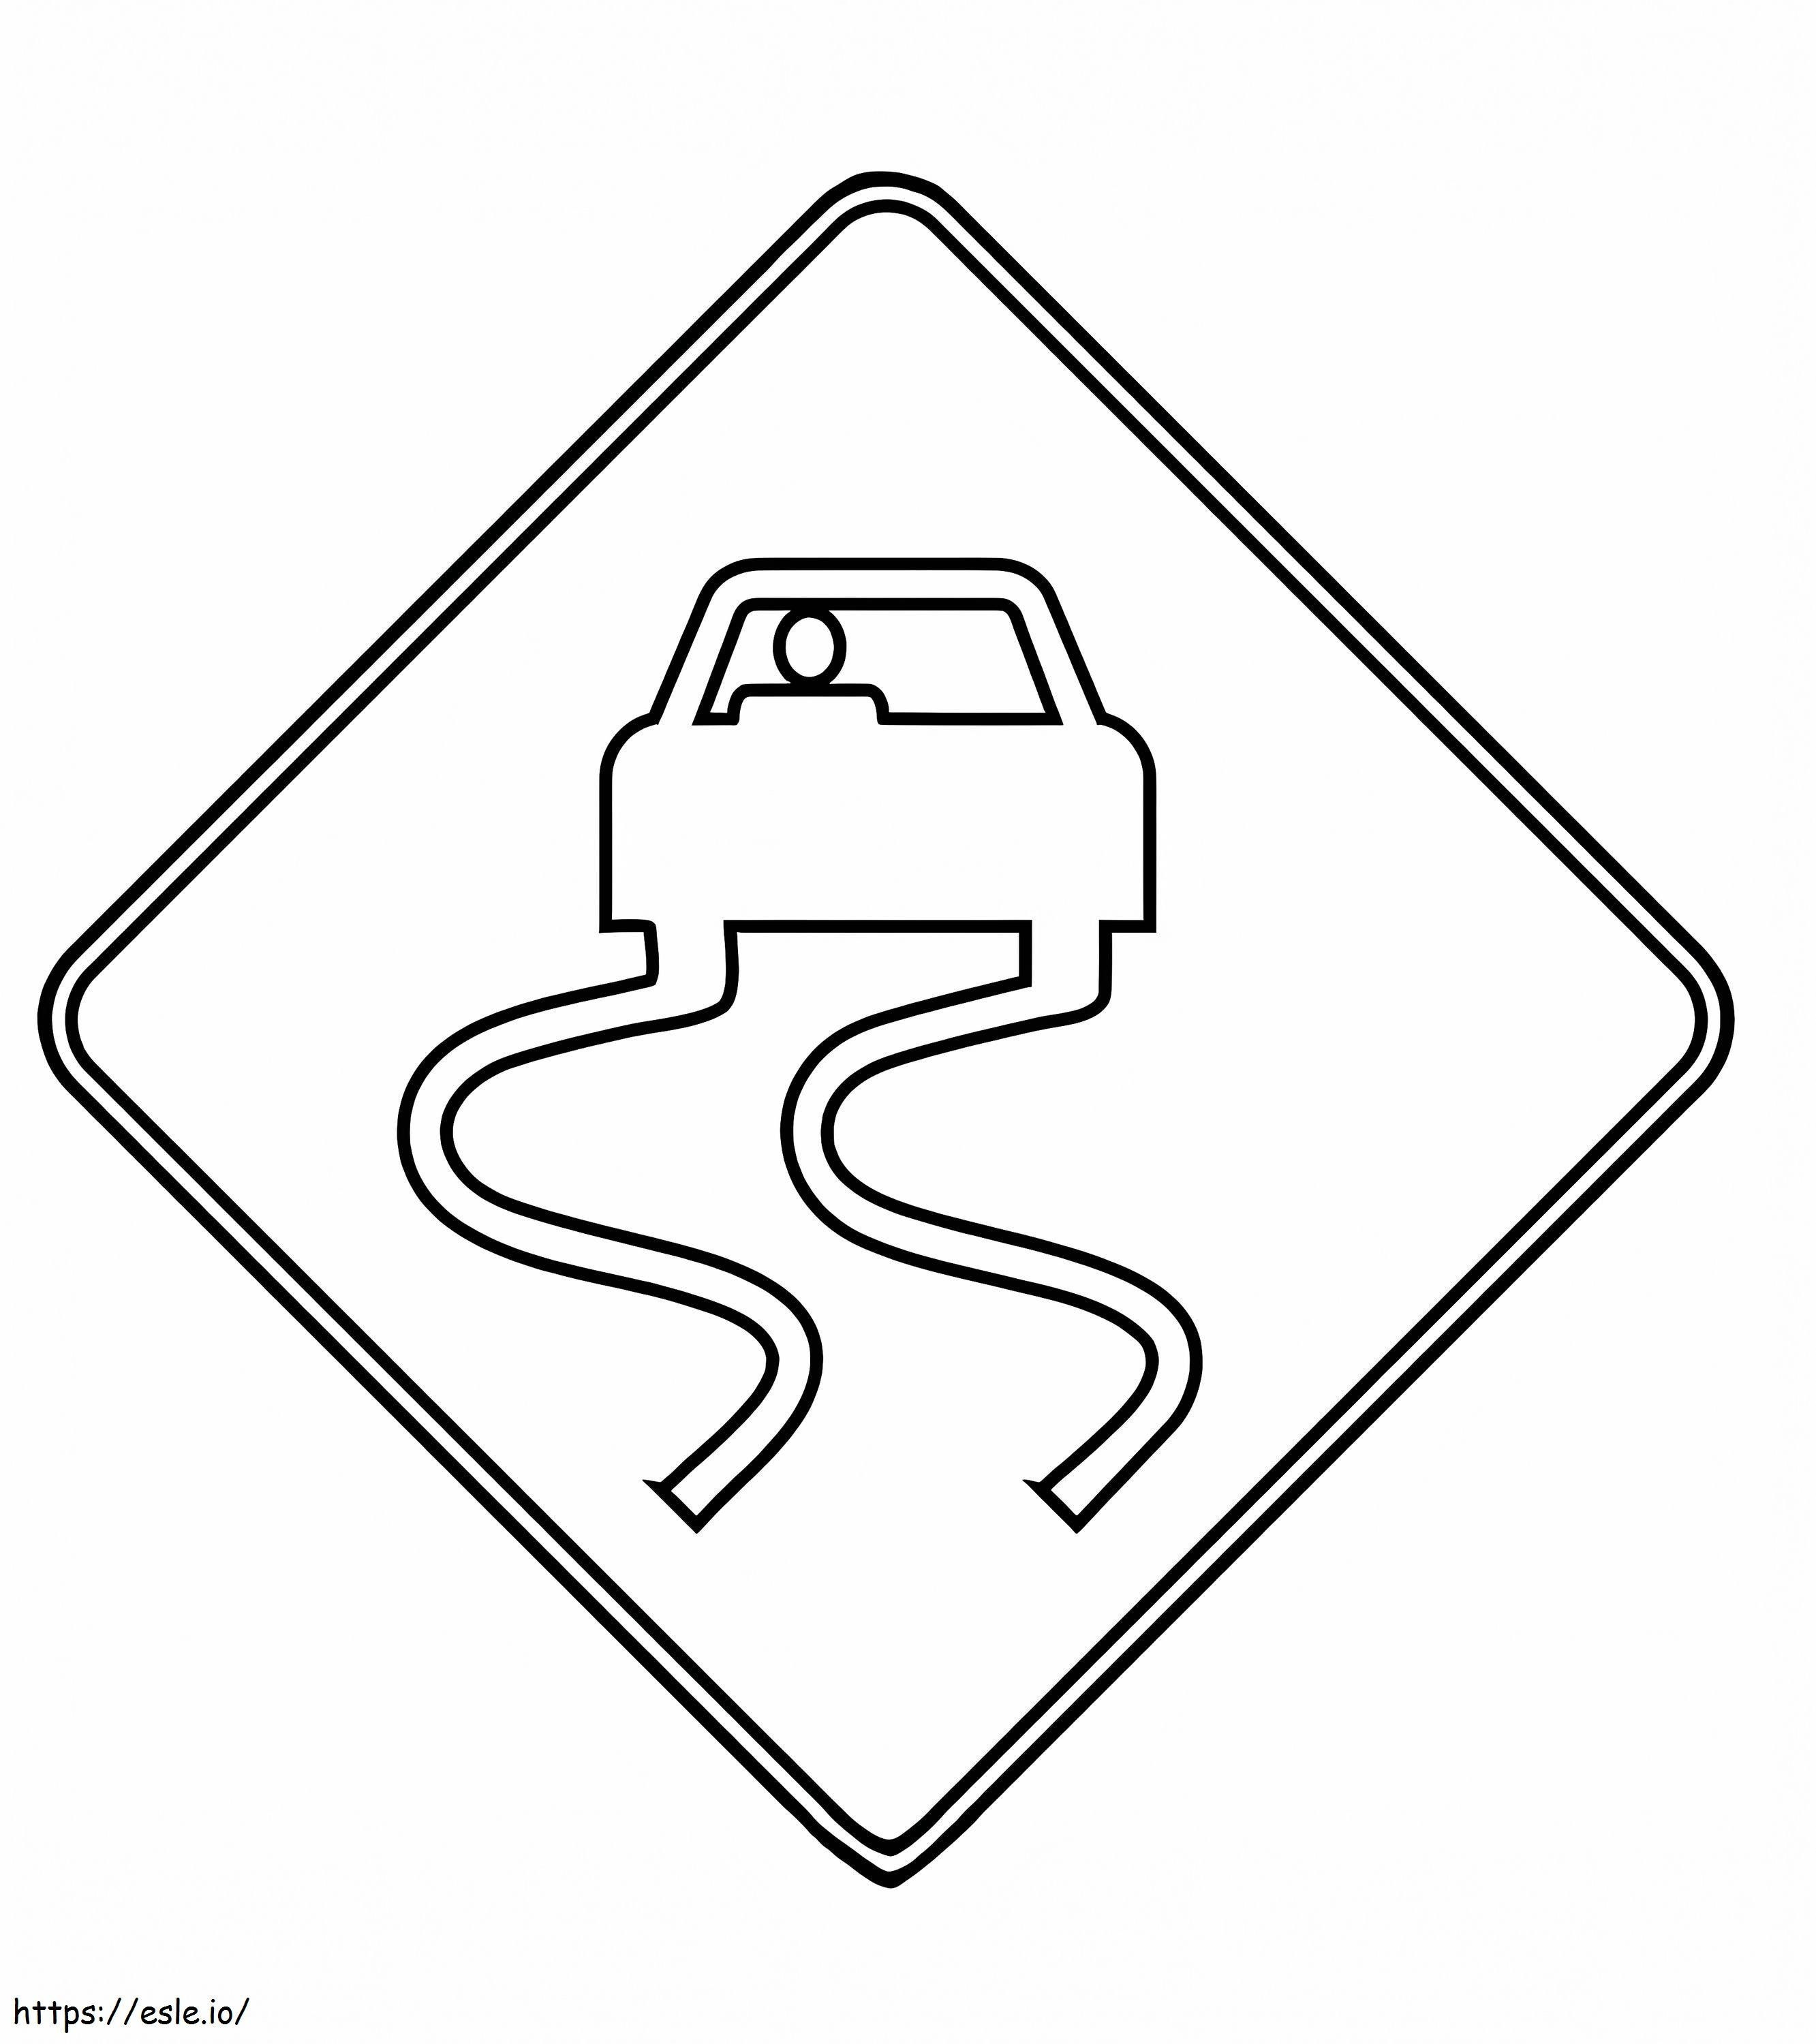 Slippery When Wet Sign coloring page